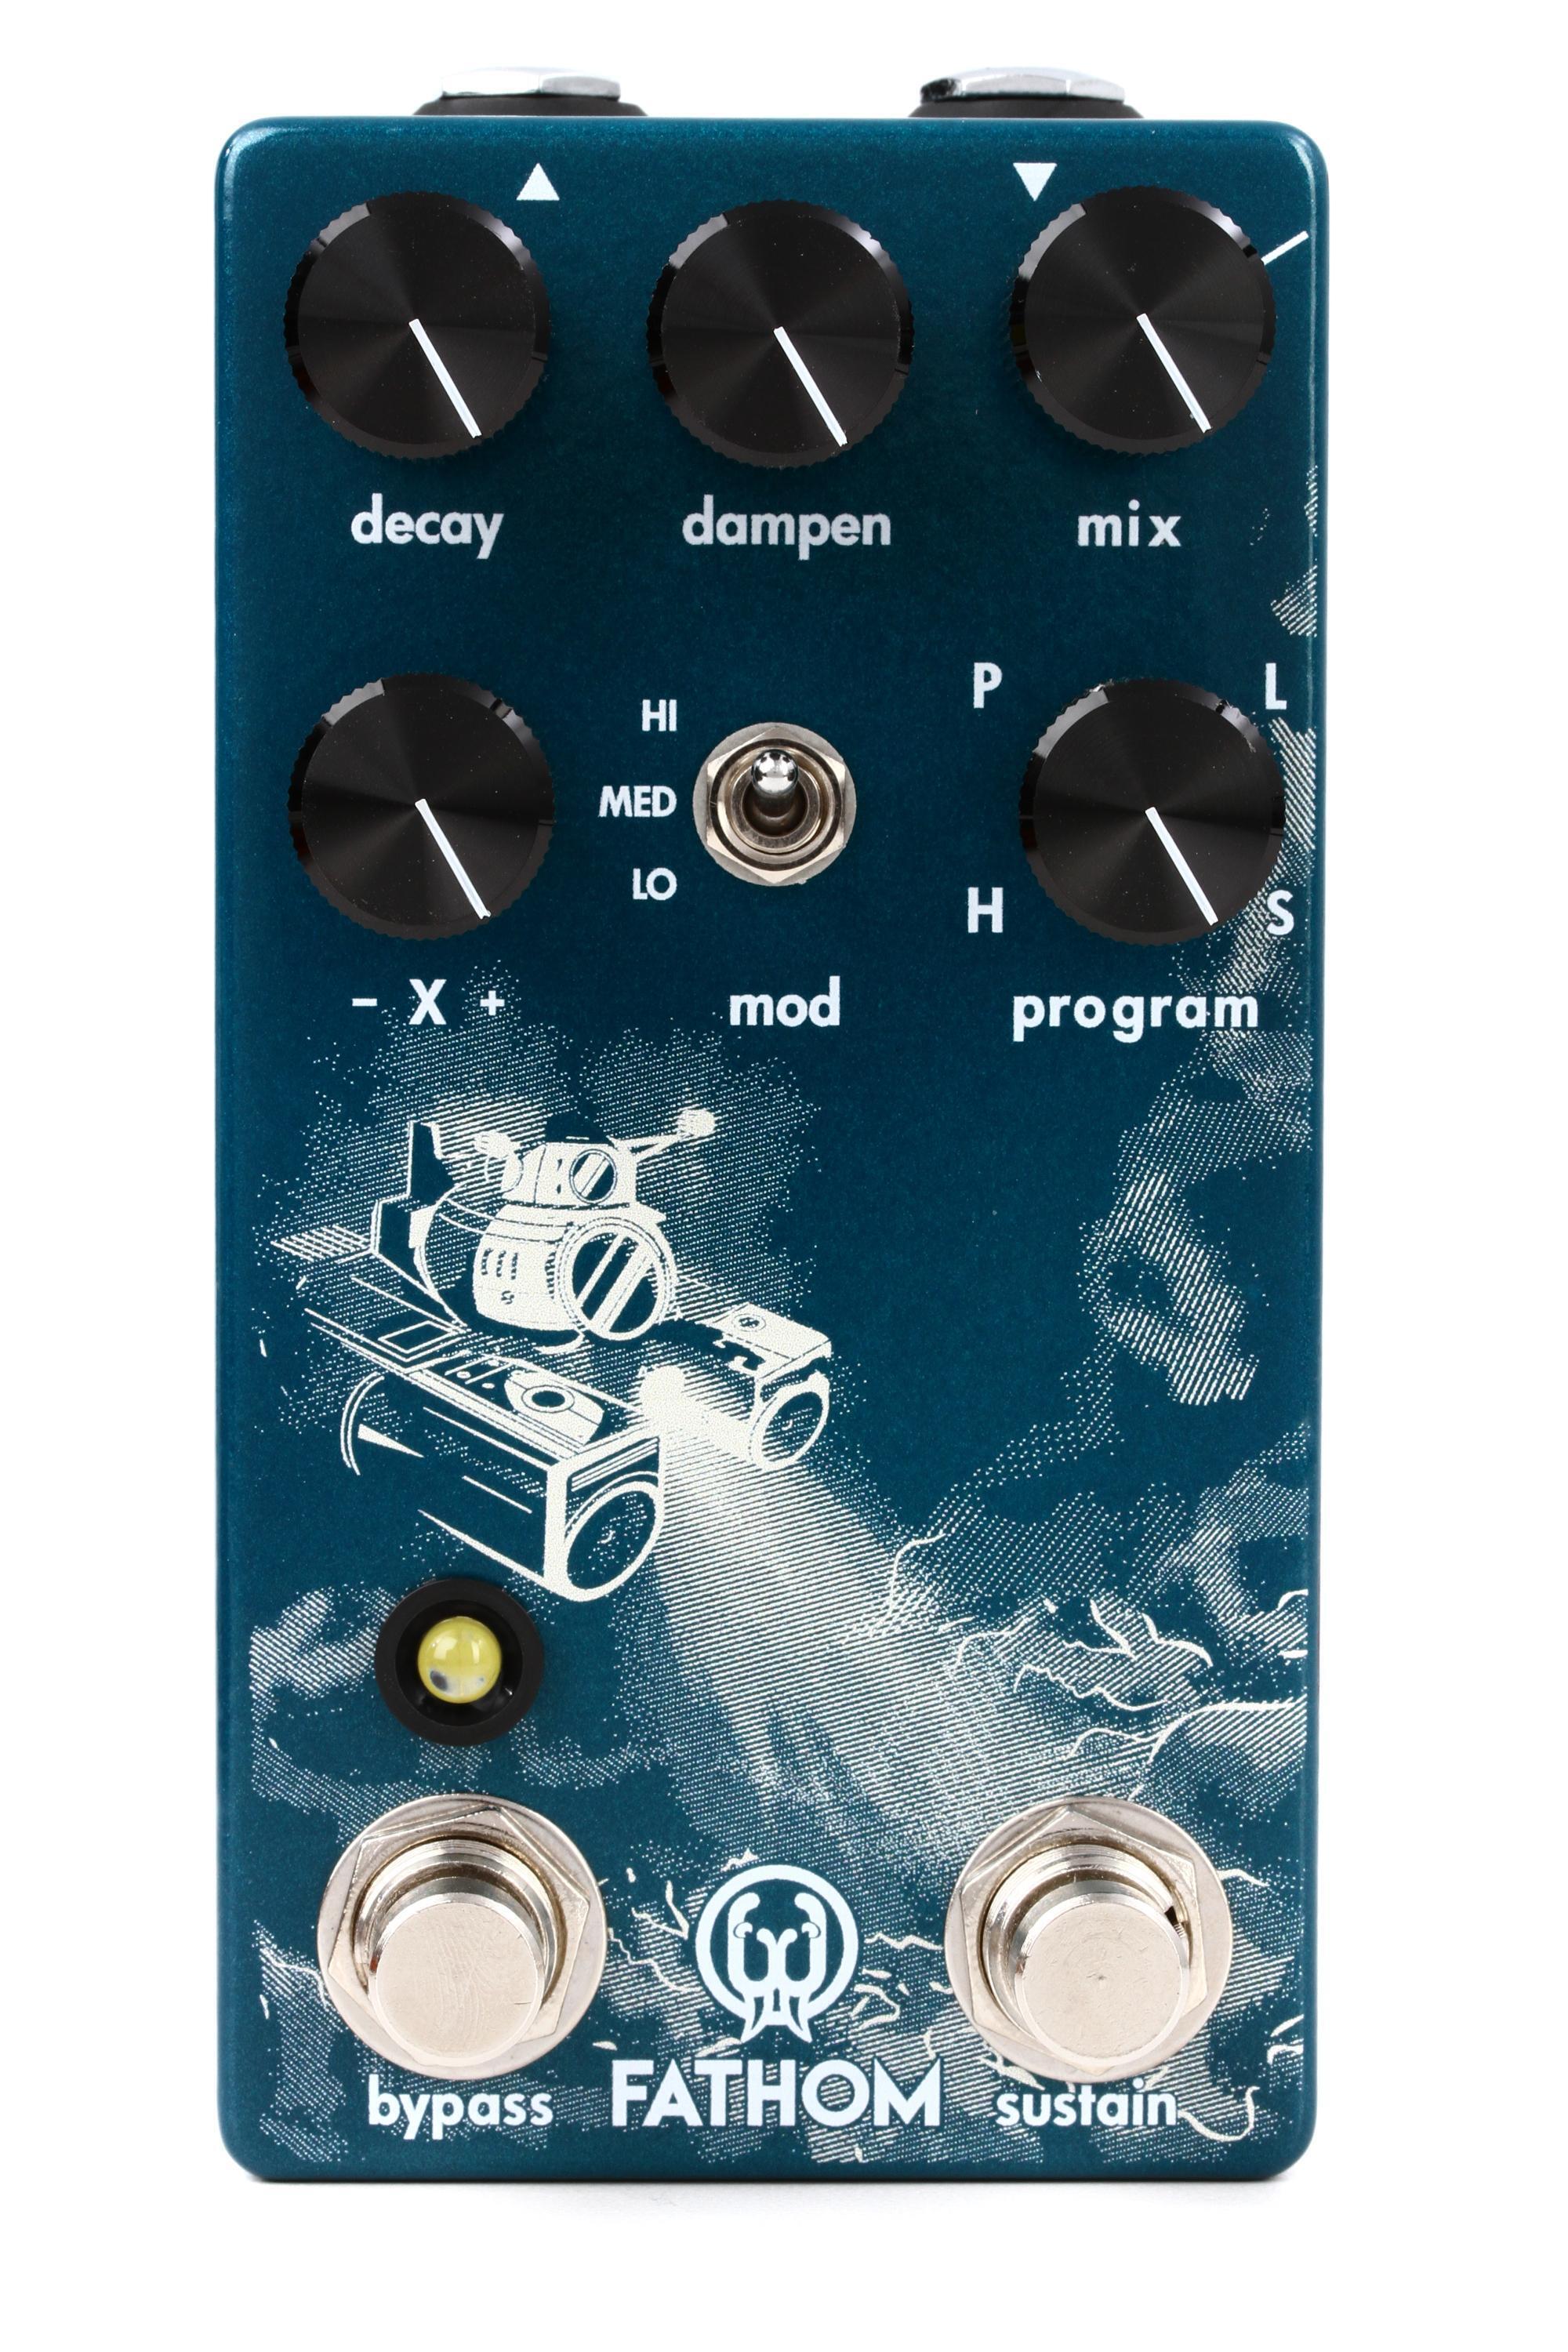 Walrus Audio Fathom Multi-function Reverb Pedal | Sweetwater